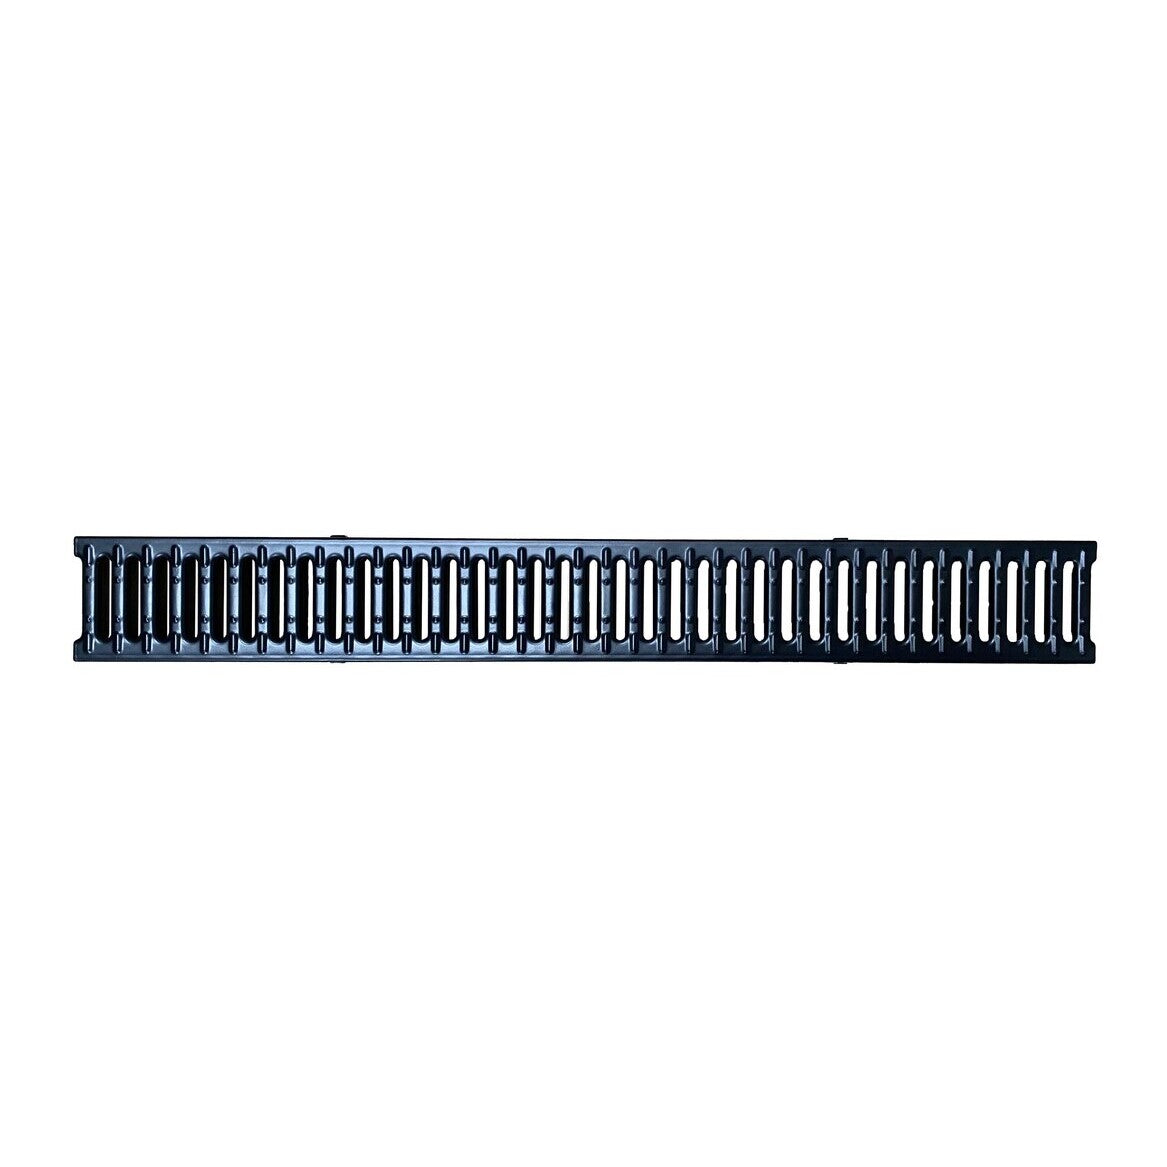 Black Powder Coated Galvanised Steel Channel Drain Grate 125mm x 1000mm (5 Inch)